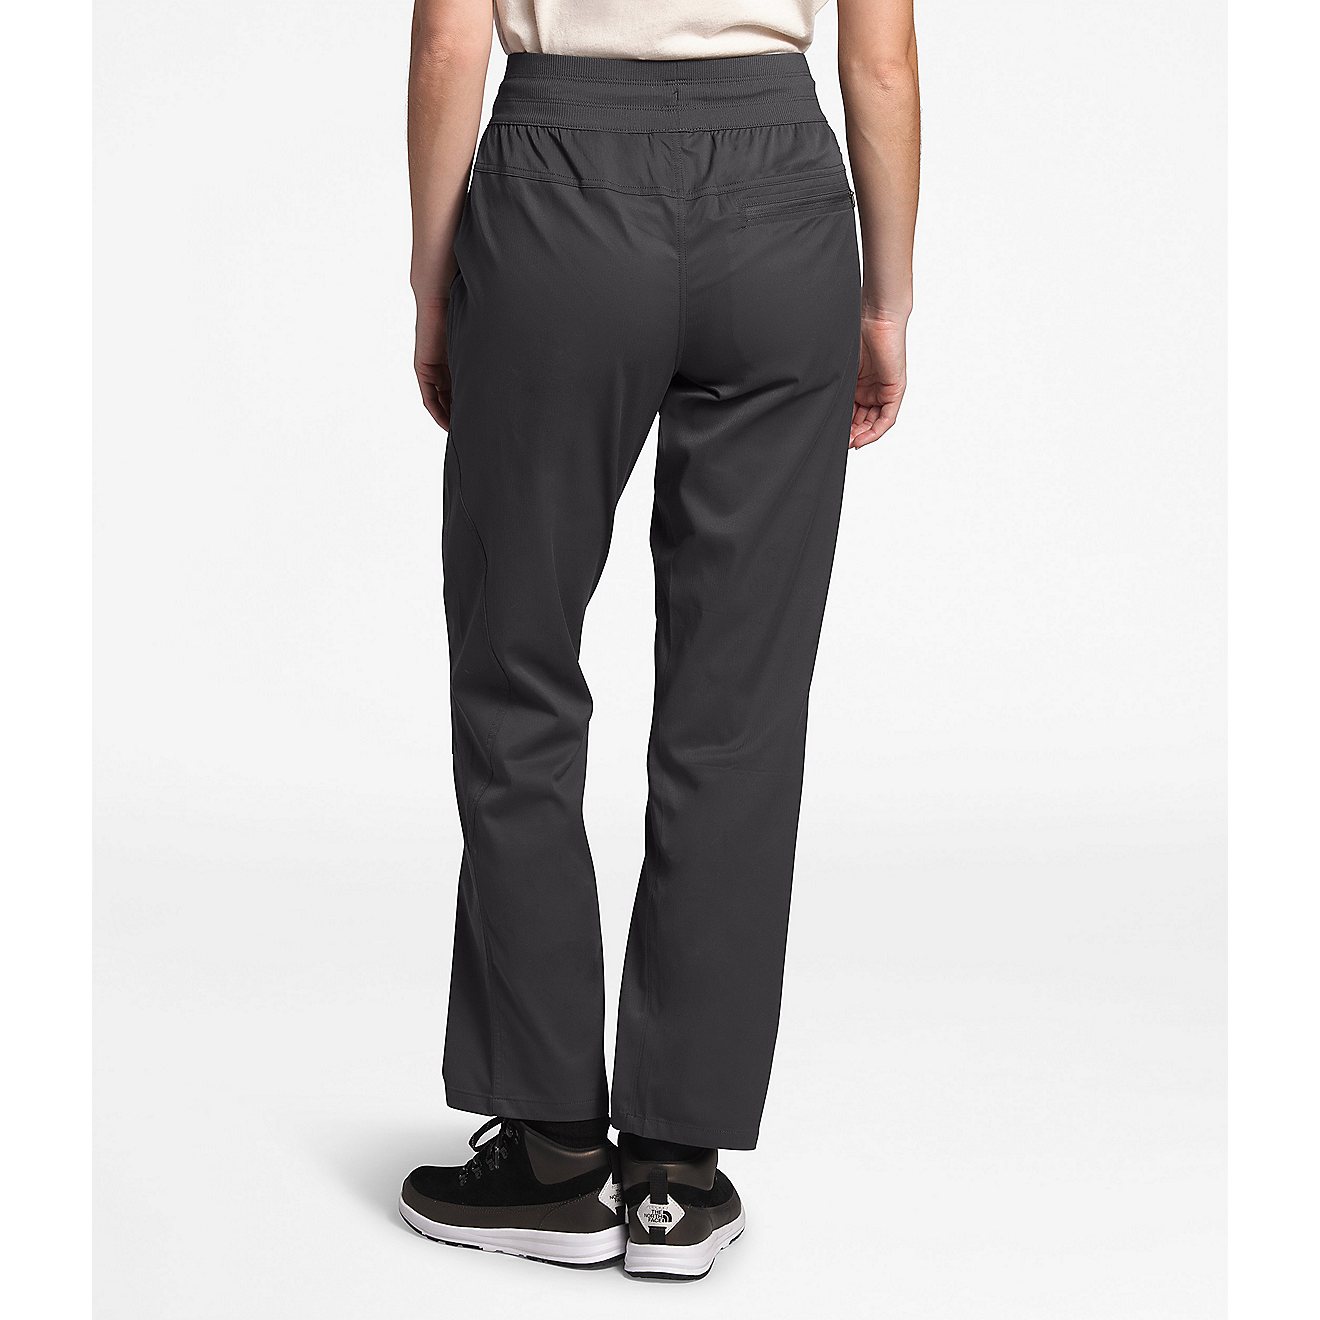 The North Face Women's Aphrodite Motion Pants                                                                                    - view number 2